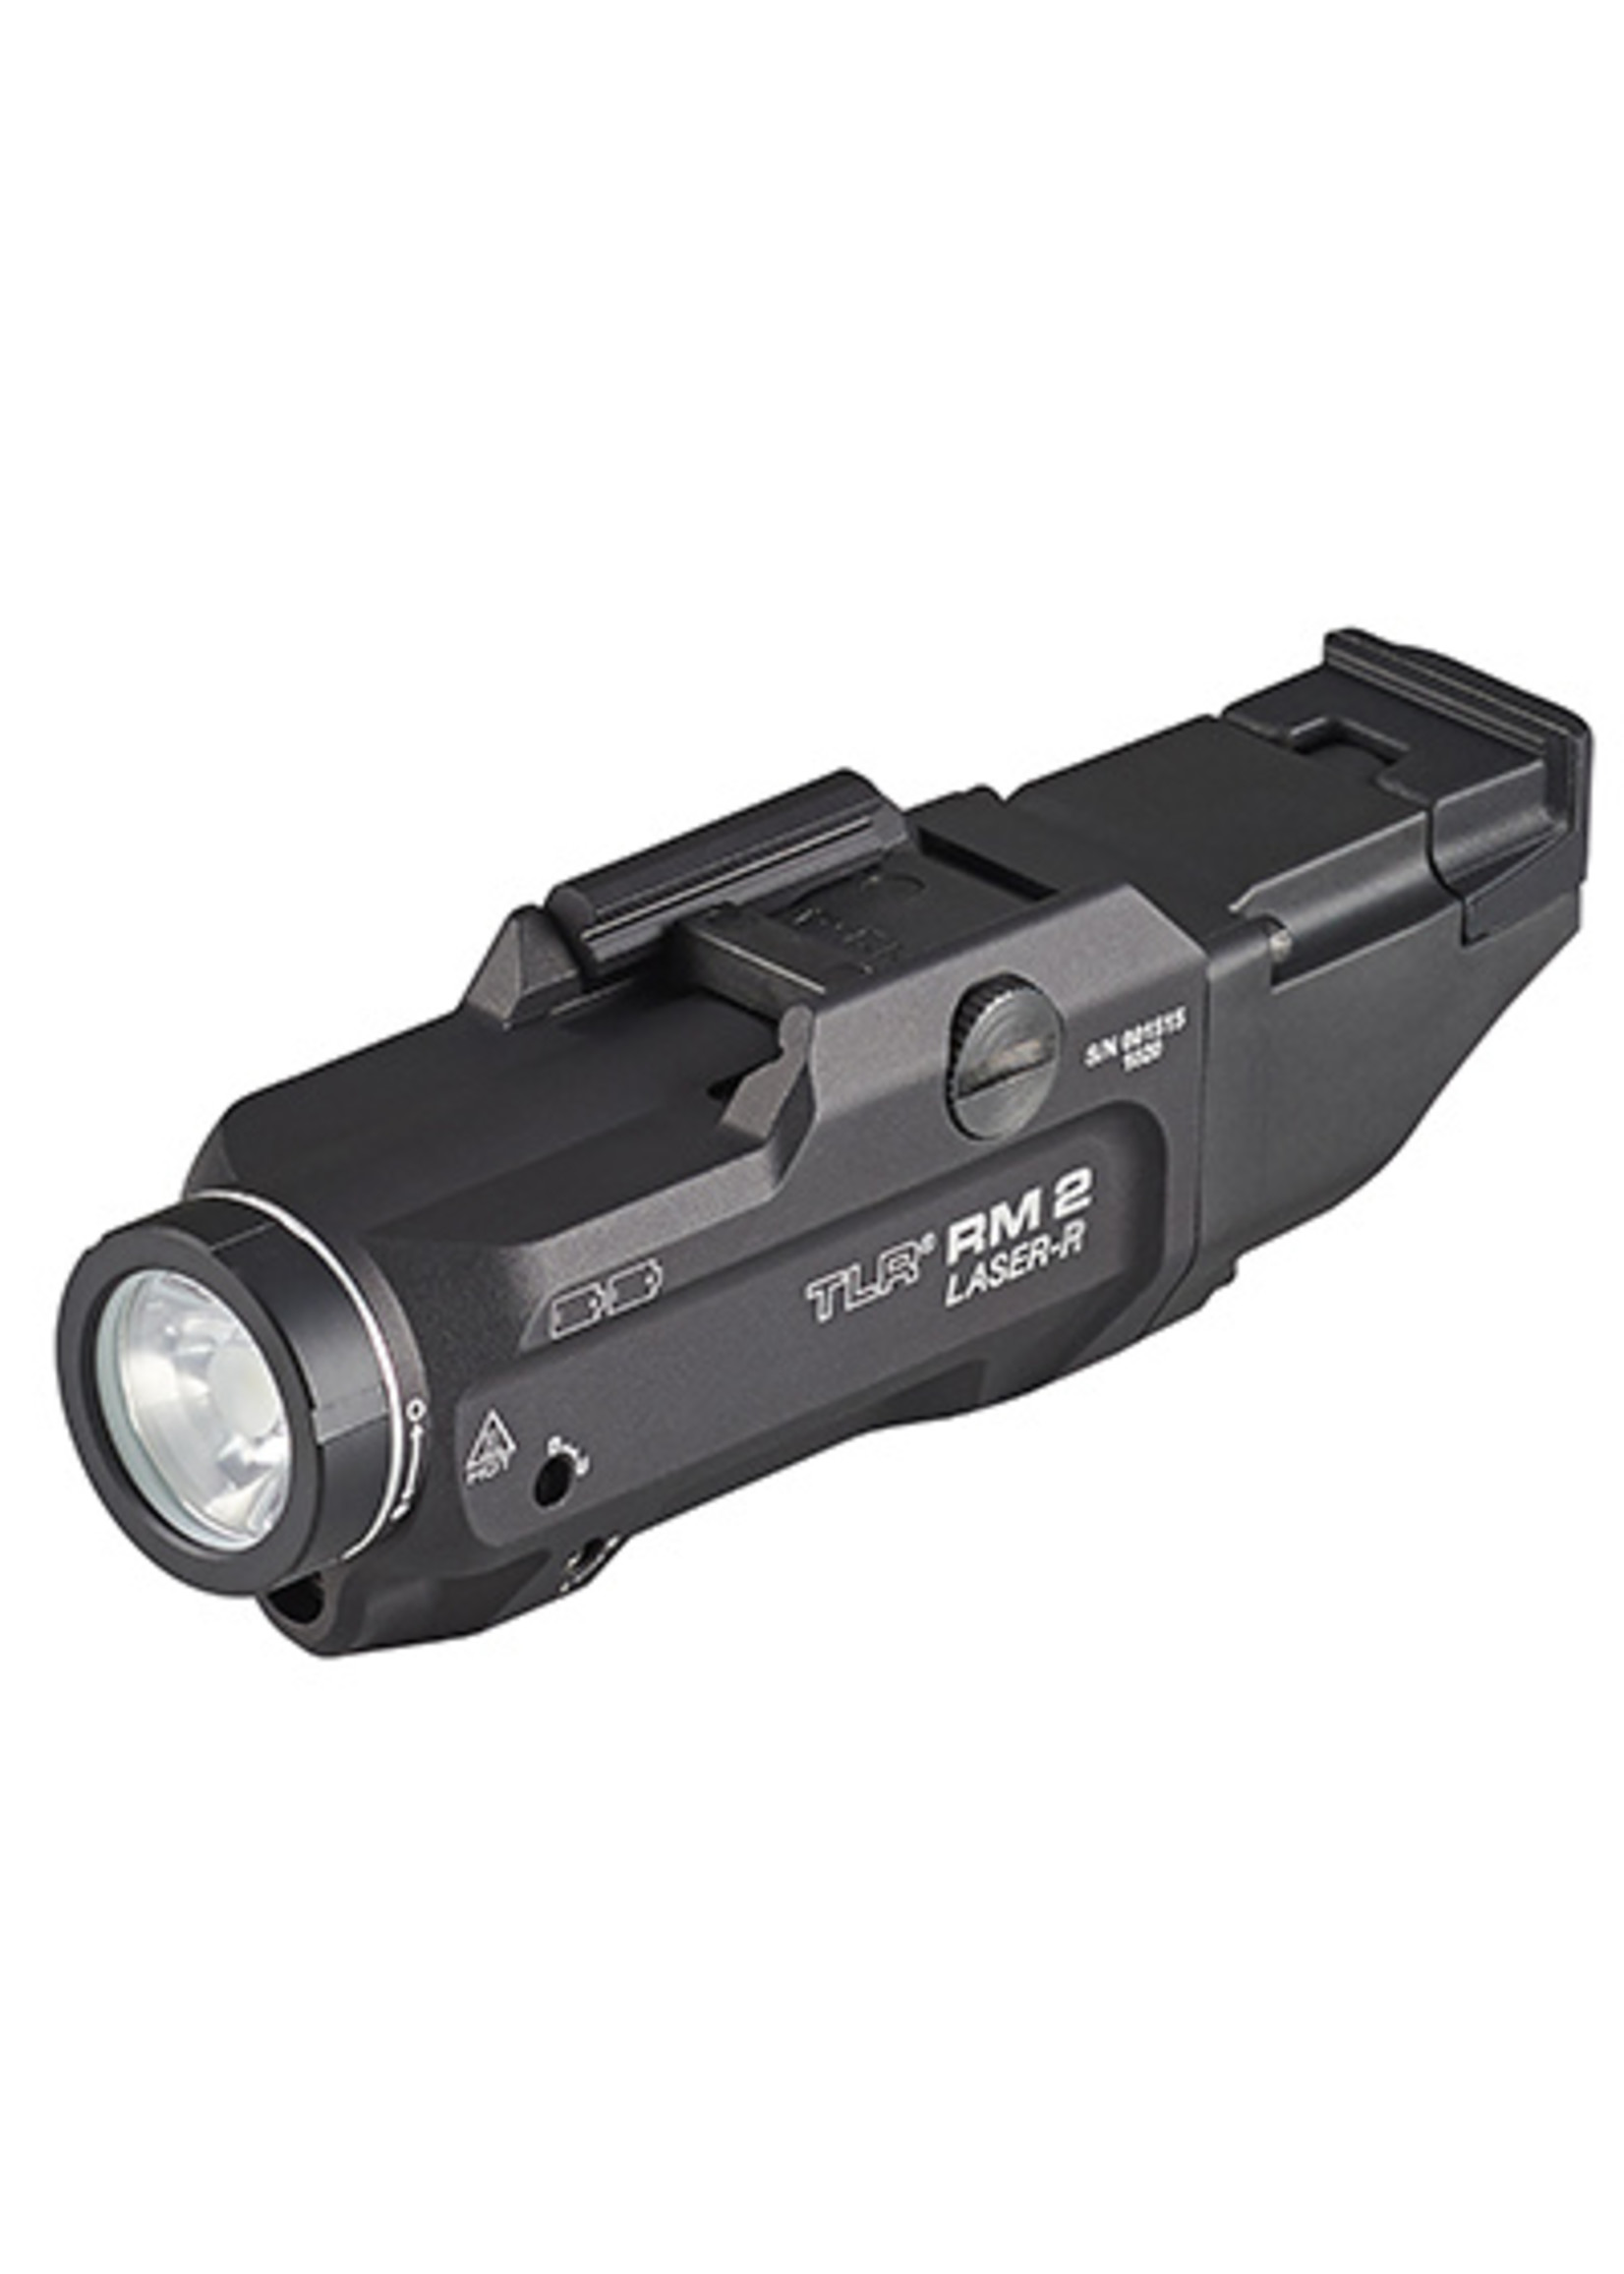 STREAMLIGHT TLR RM 2 LASER RAIL MOUNTED TACTICAL LIGHTING SYSTEM